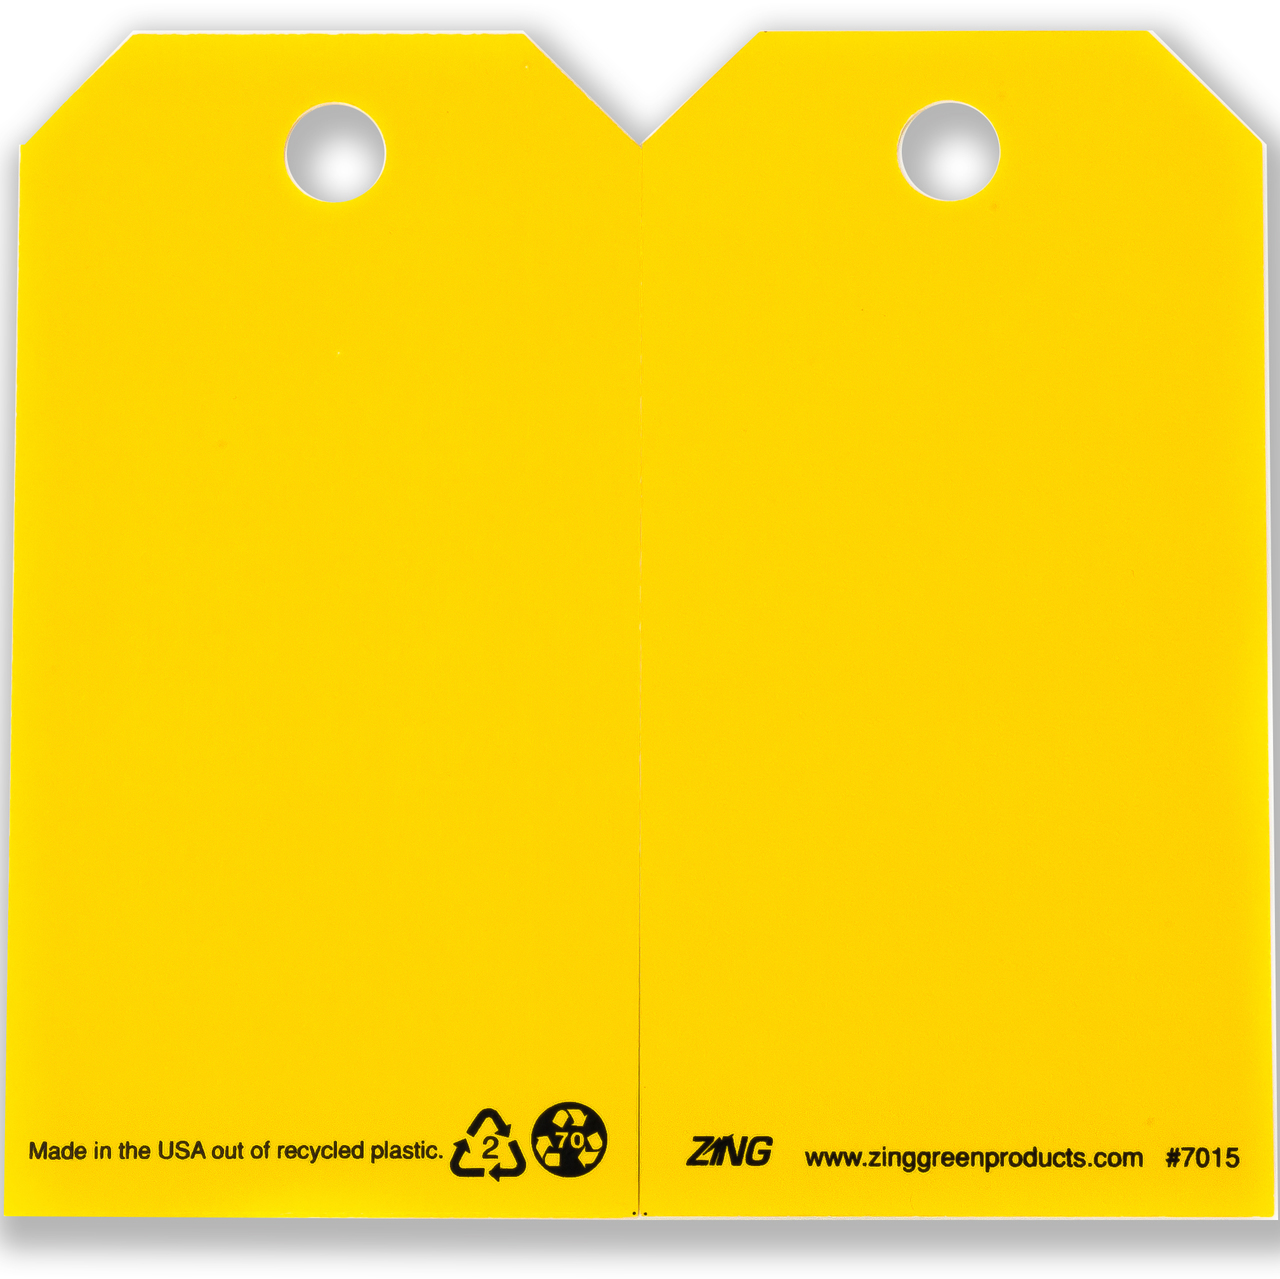 ZING Eco Safety Tag, Blank - Yellow, 5.75Hx3W, 10 Pack